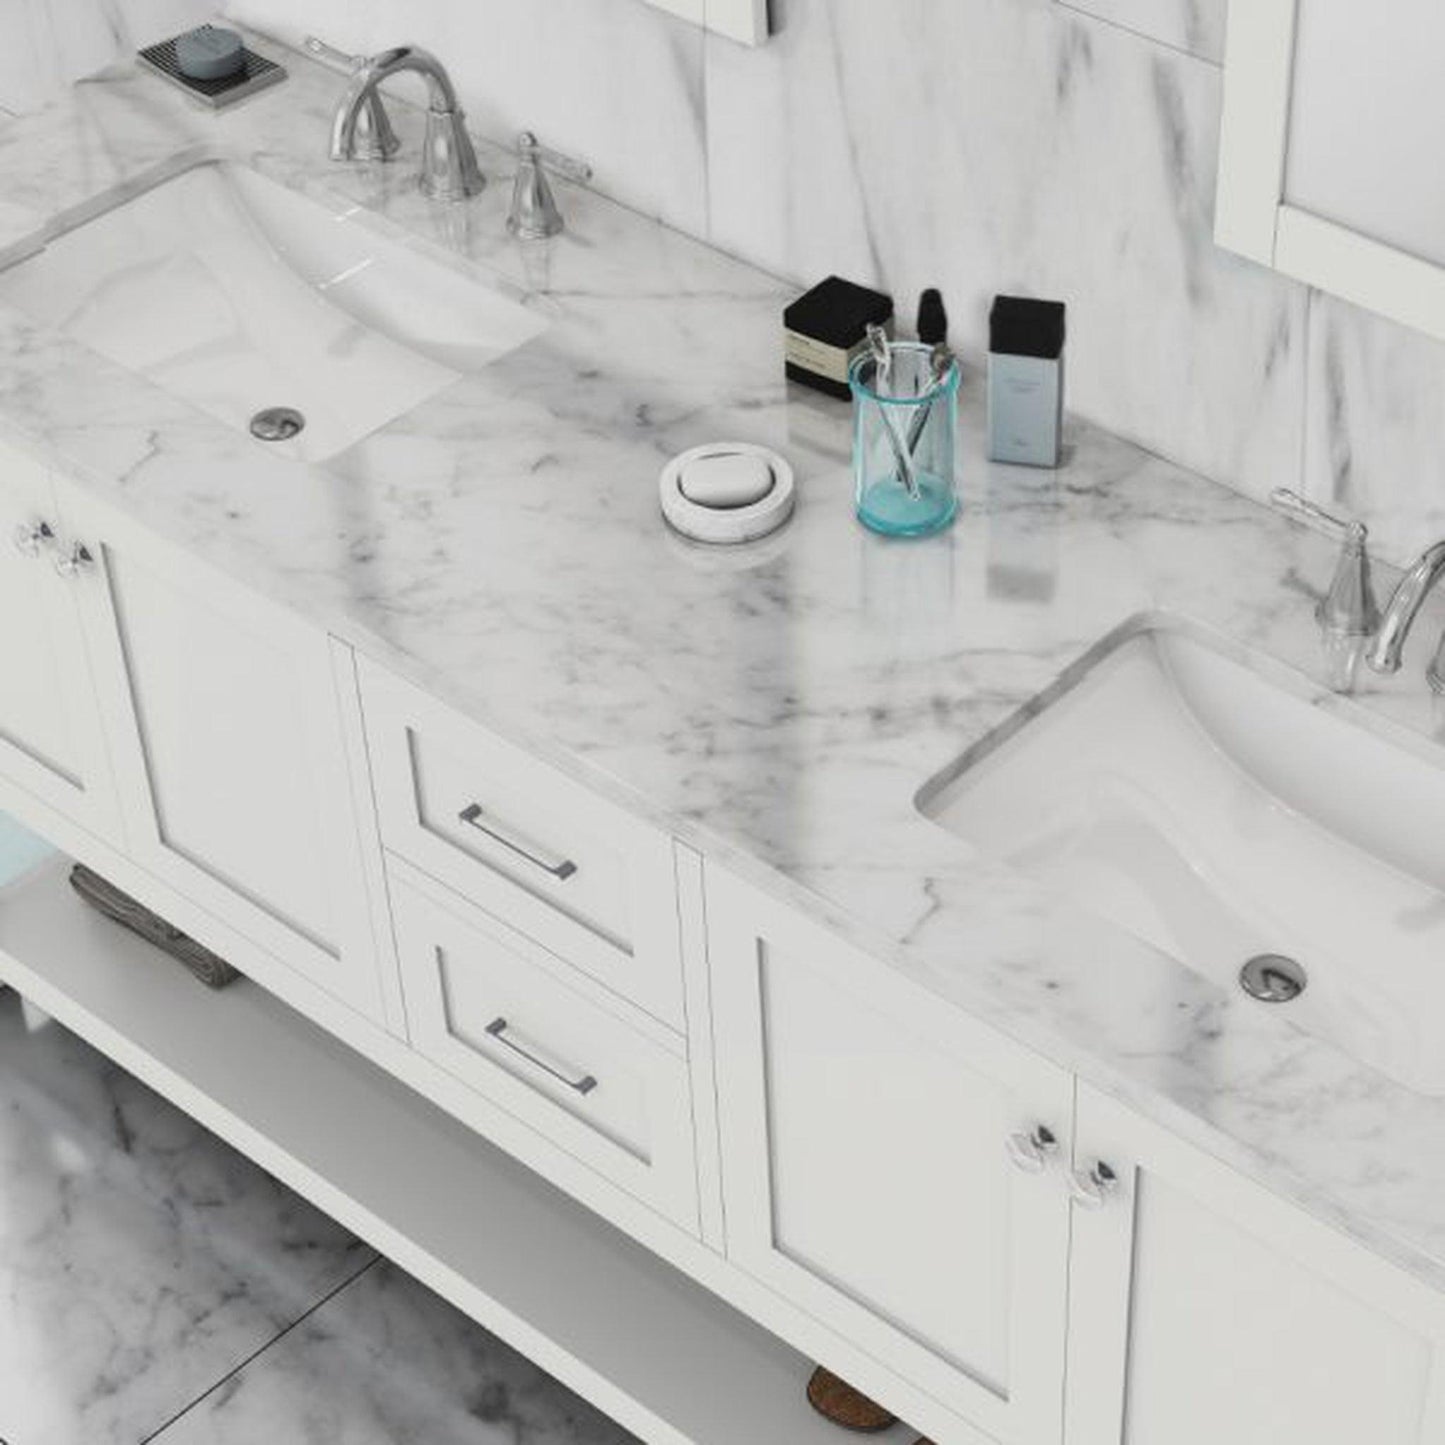 Alya Bath Wilmington 72" Double White Freestanding Bathroom Vanity With Carrara Marble Top, Ceramic Sink and Wall Mounted Mirror